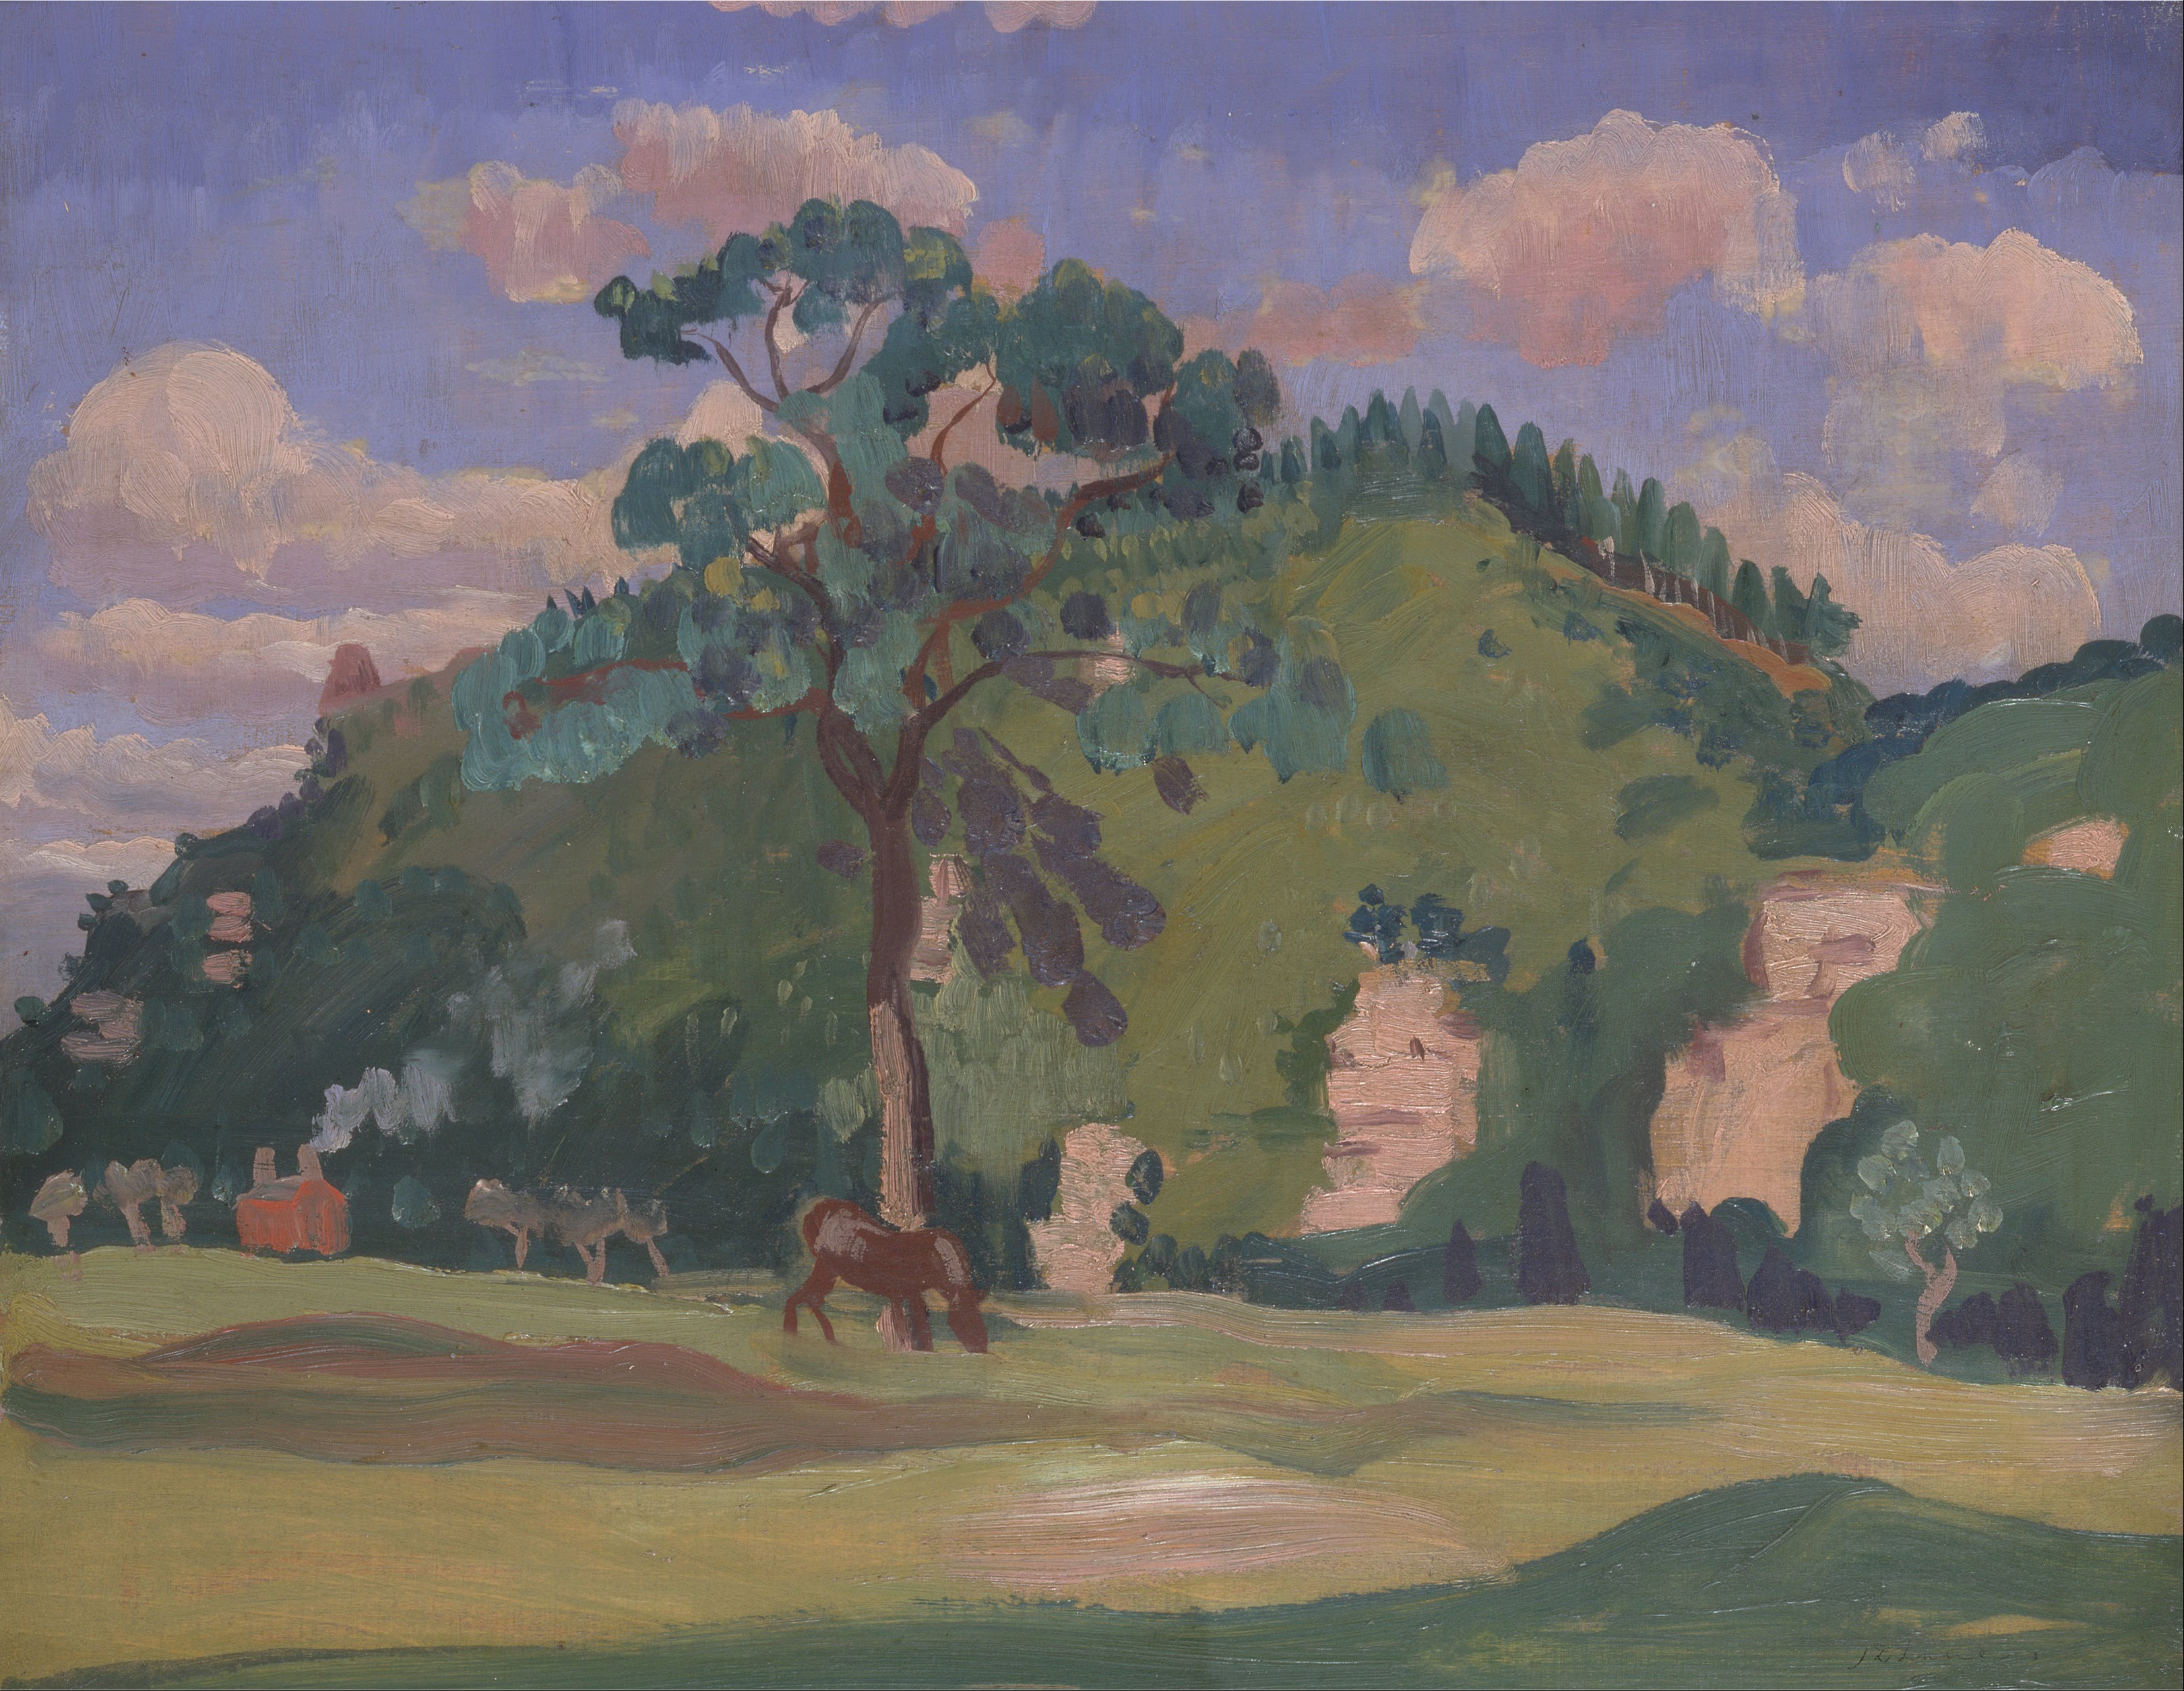 James Dickson Innes - Landscape with a Grazing Horse - Google Art Project